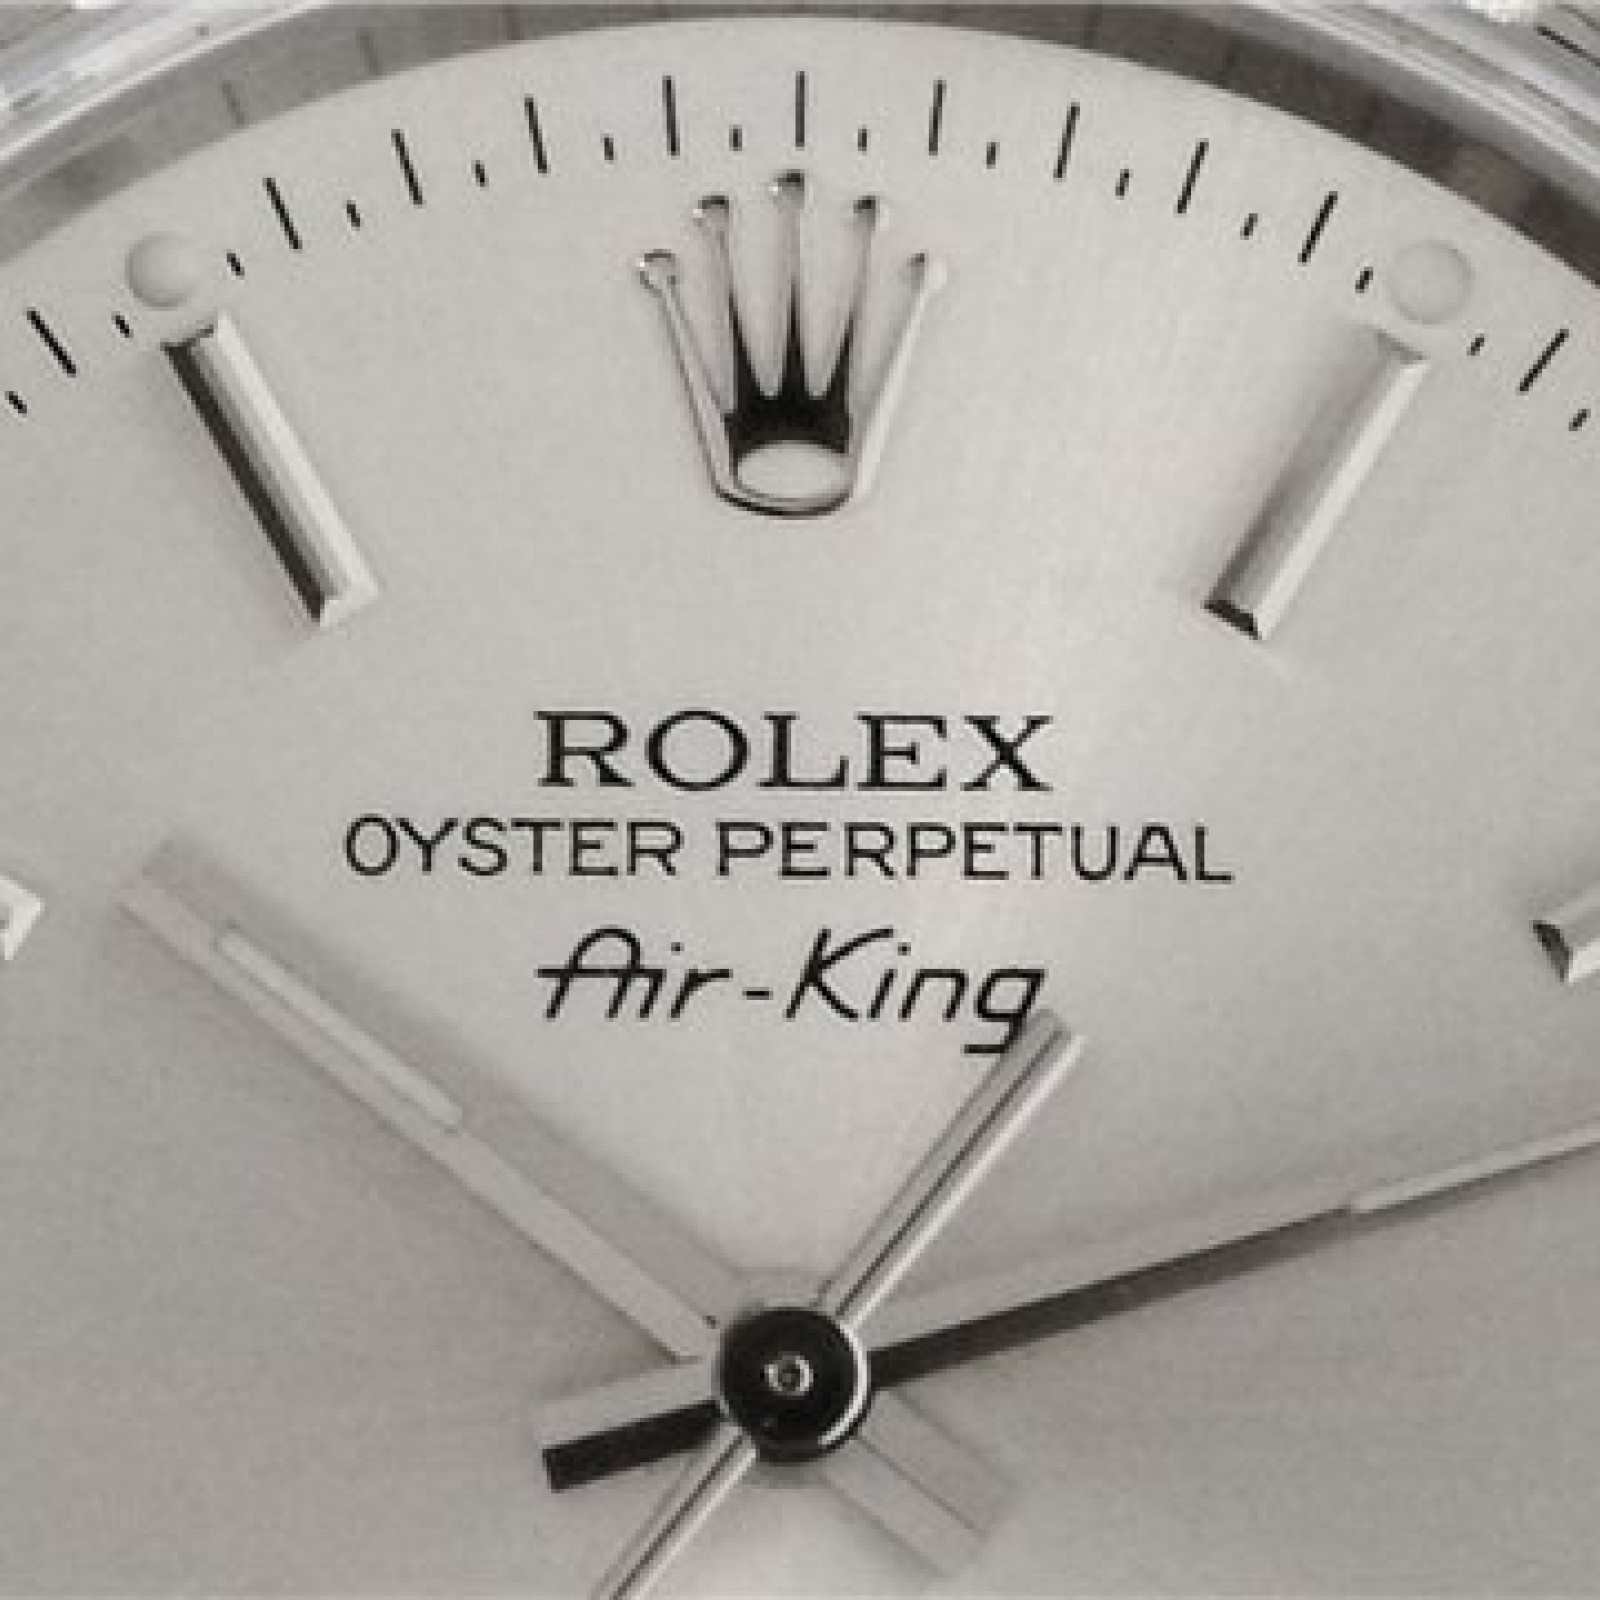 Pre-Owned Rolex Air King 14010M Steel Year 2005 2005